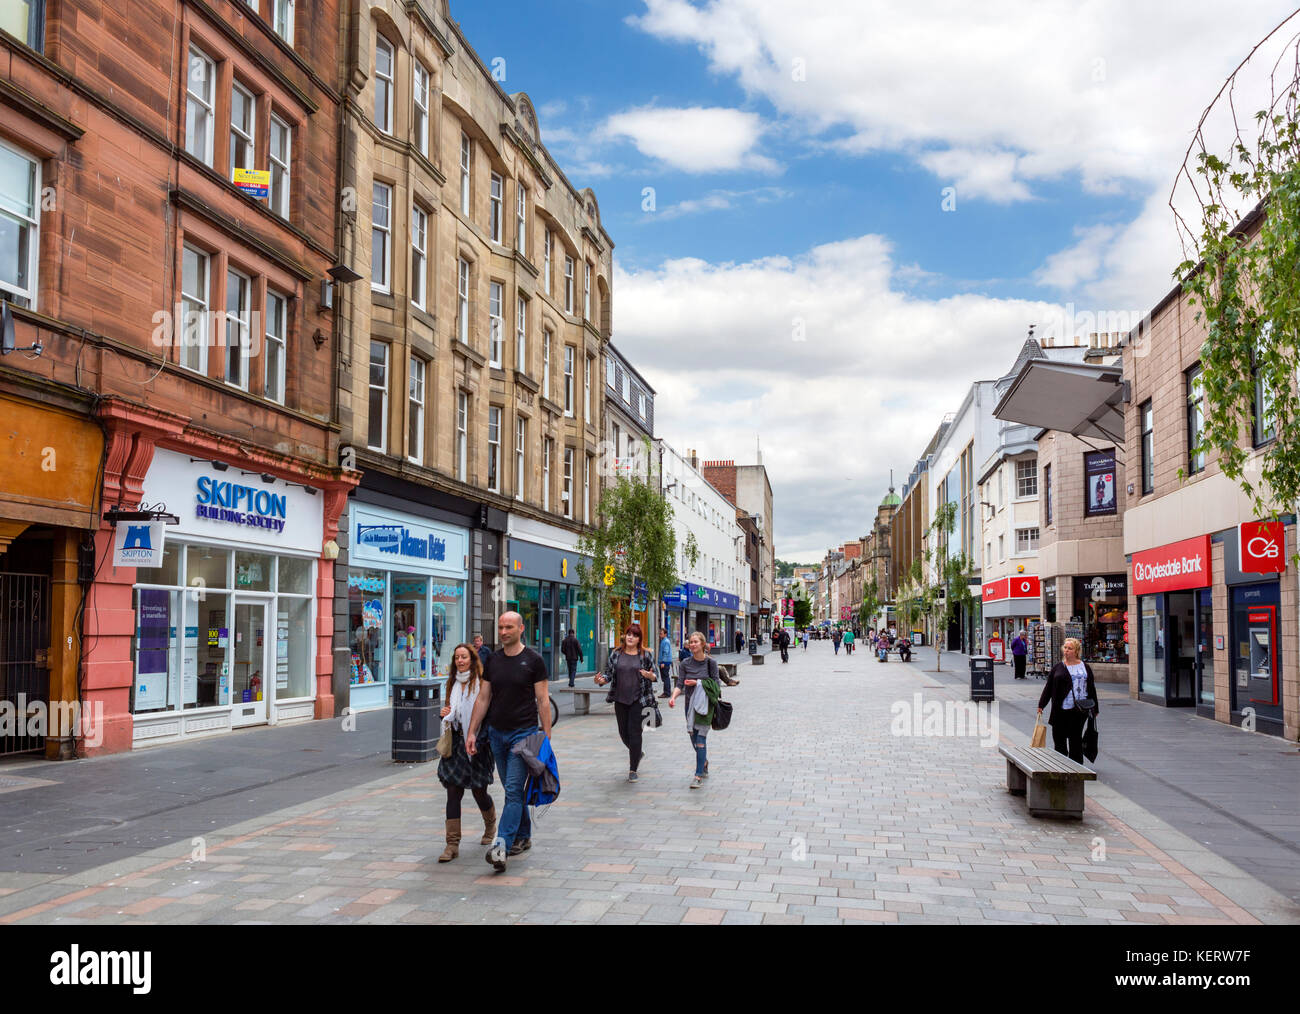 Shops on the High Street in the town centre, Perth, Scotland, UK Stock Photo